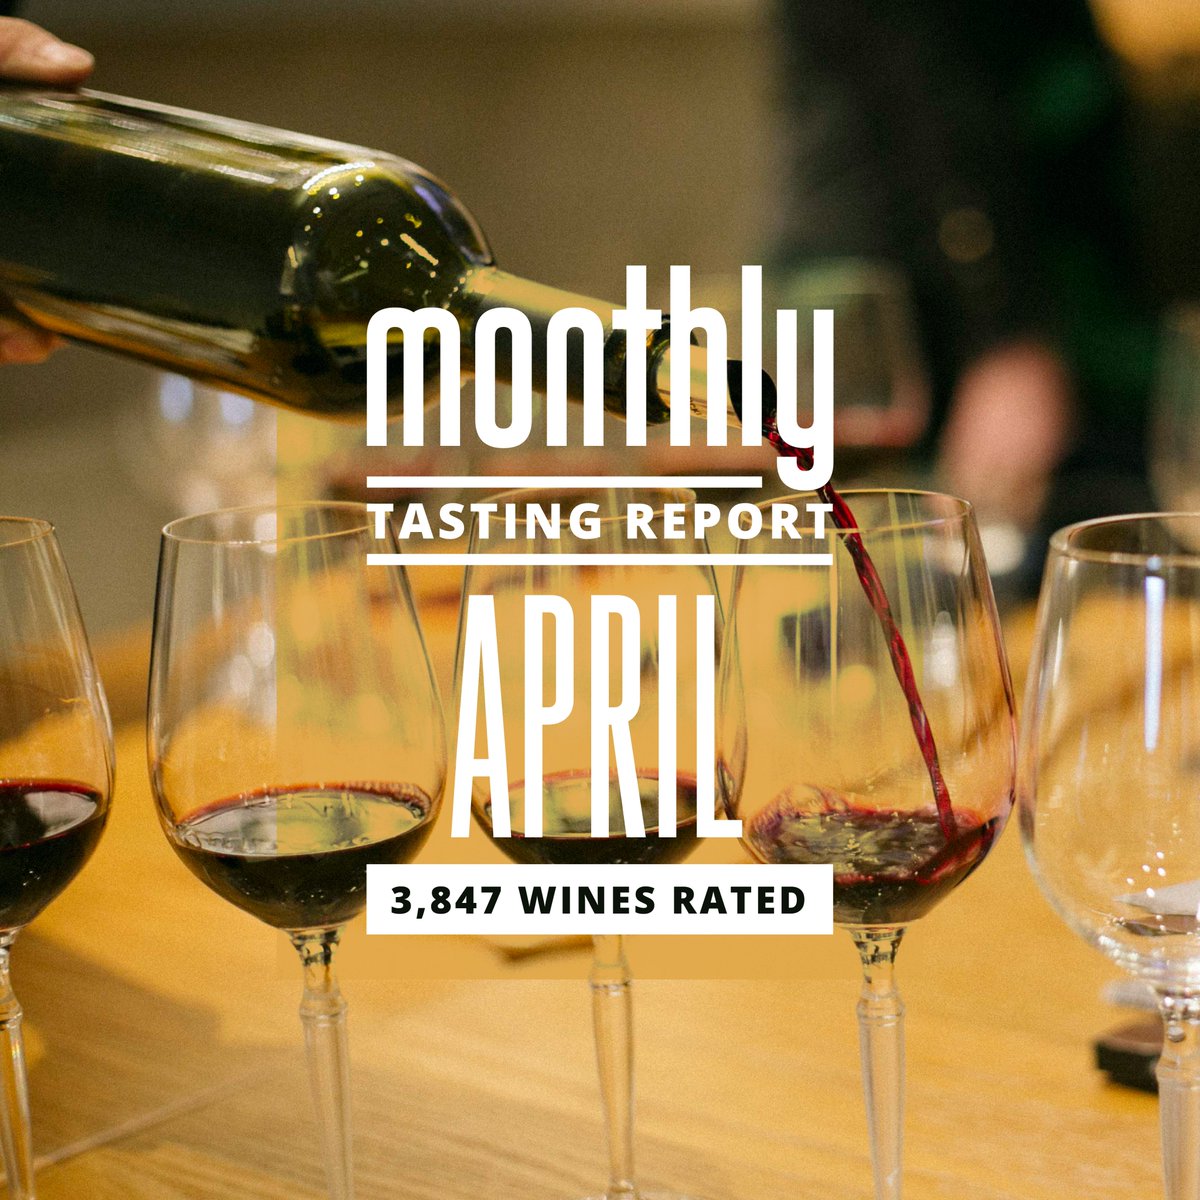 ...and that’s a wrap on April! We rated 3,847 wines from 16 countries, including 692 from #Argentina, 443 from the #UnitedStates and 417 from #Italy. But it was in our tastings of 1,944 #Frenchwines where we really struck gold. Read the full report here: jamessuckling.com/wine-tasting-r…